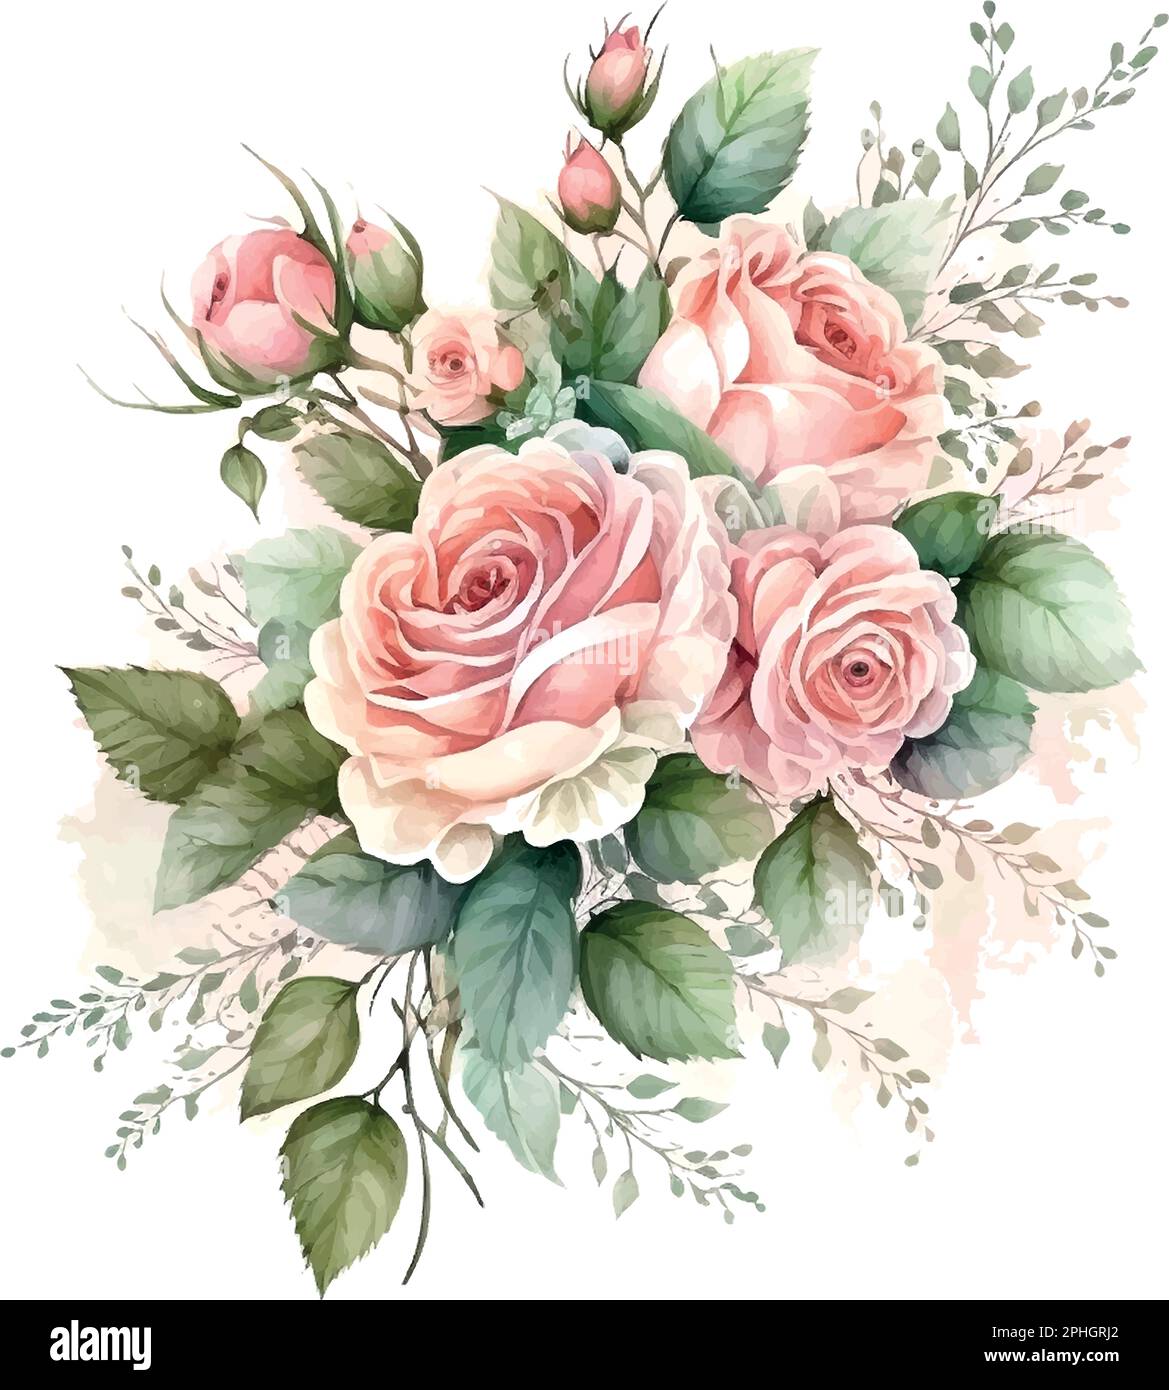 Dusty pink and cream rose, peony, hydrangea flower, tropical leaves vector garland wedding bouquet. Floral pastel watercolor style.Spring bouquet.Elem Stock Vector